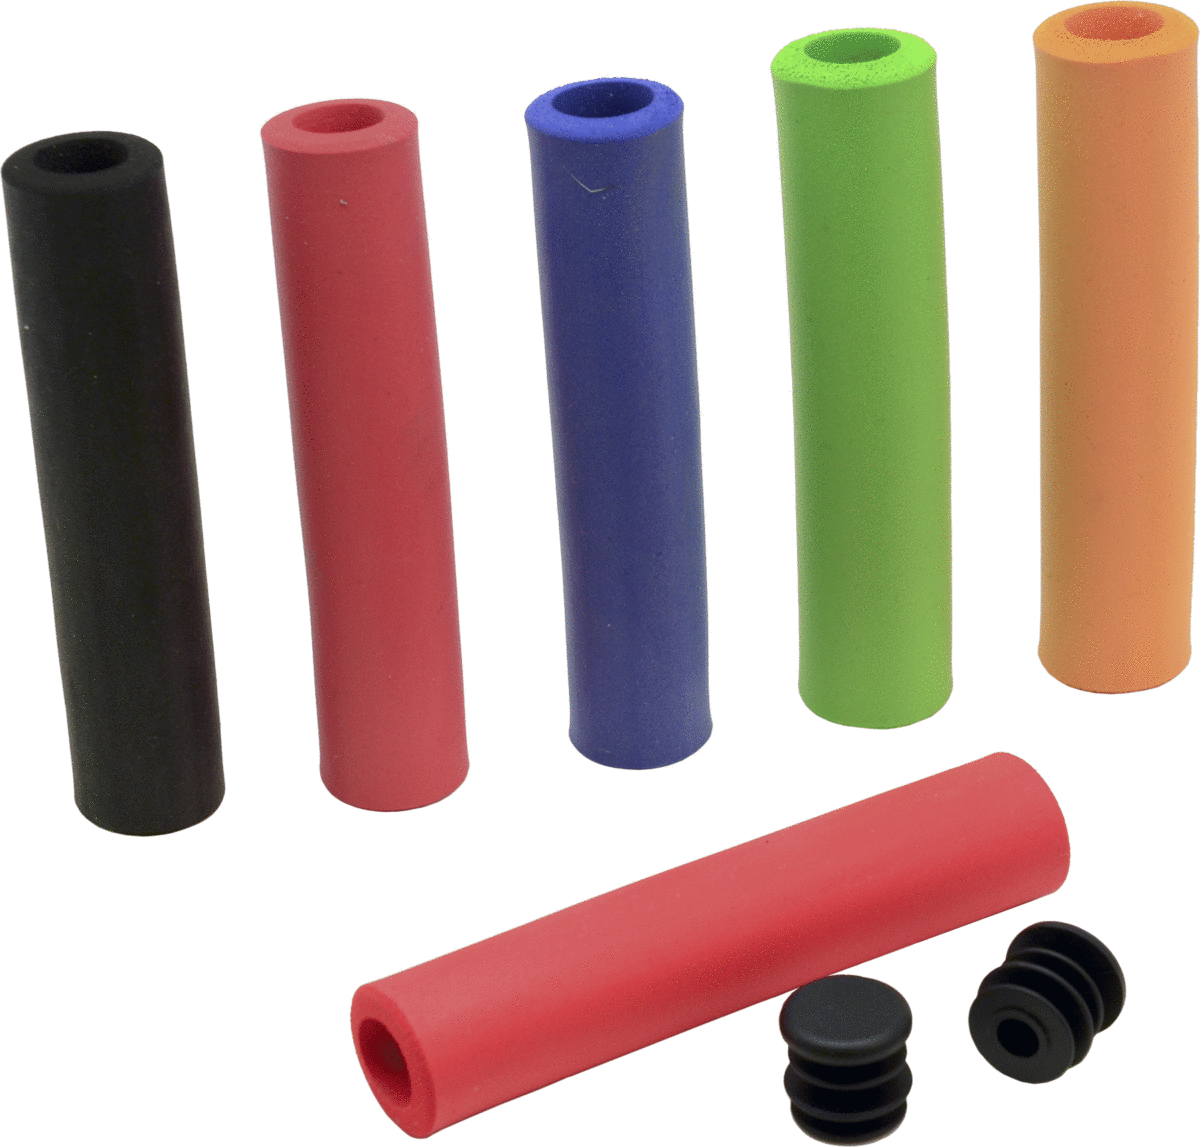 https://www.sefiles.net/images/library/zoom/49n-silicone-grips-373702-1.gif